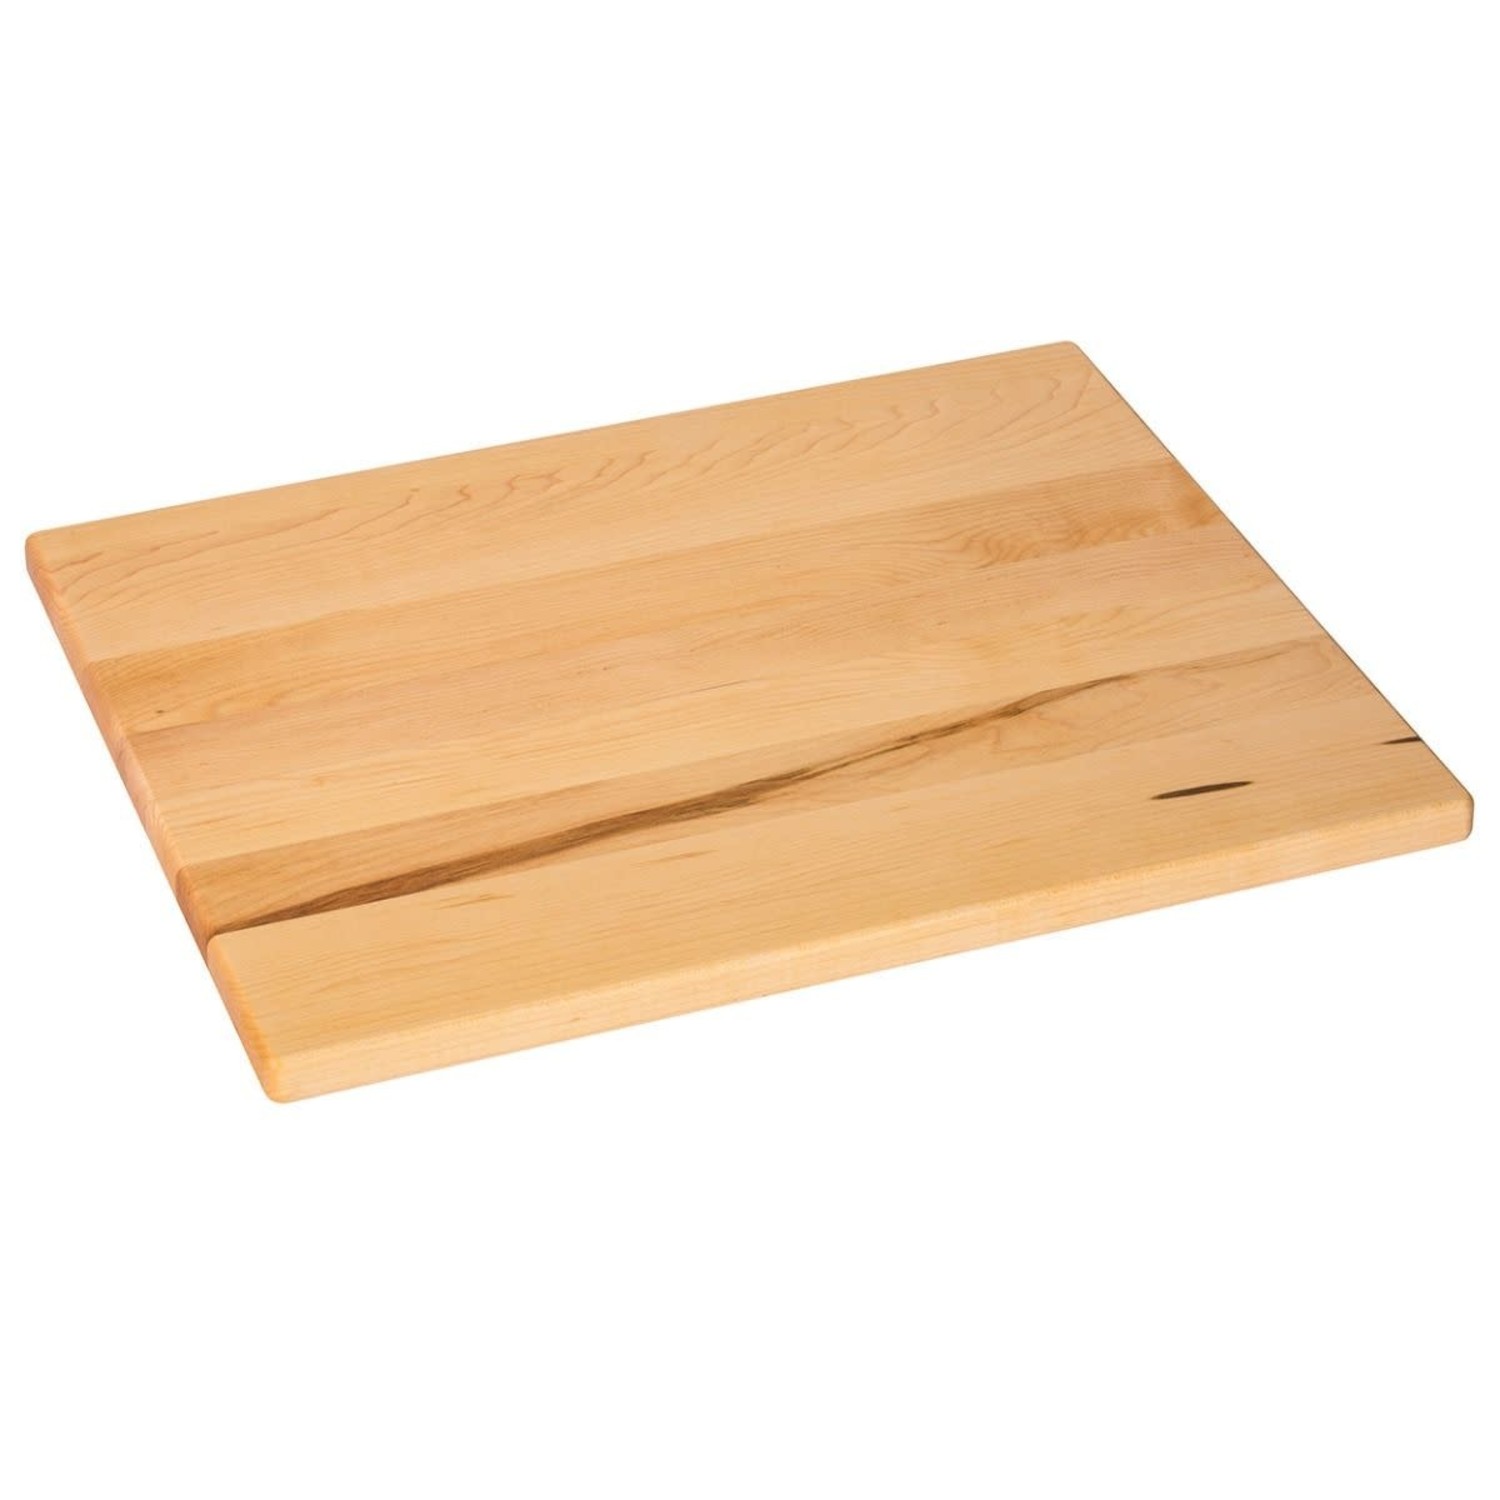 Bengston Woodworks Large Cutting Board 16 x 11 x 1.5